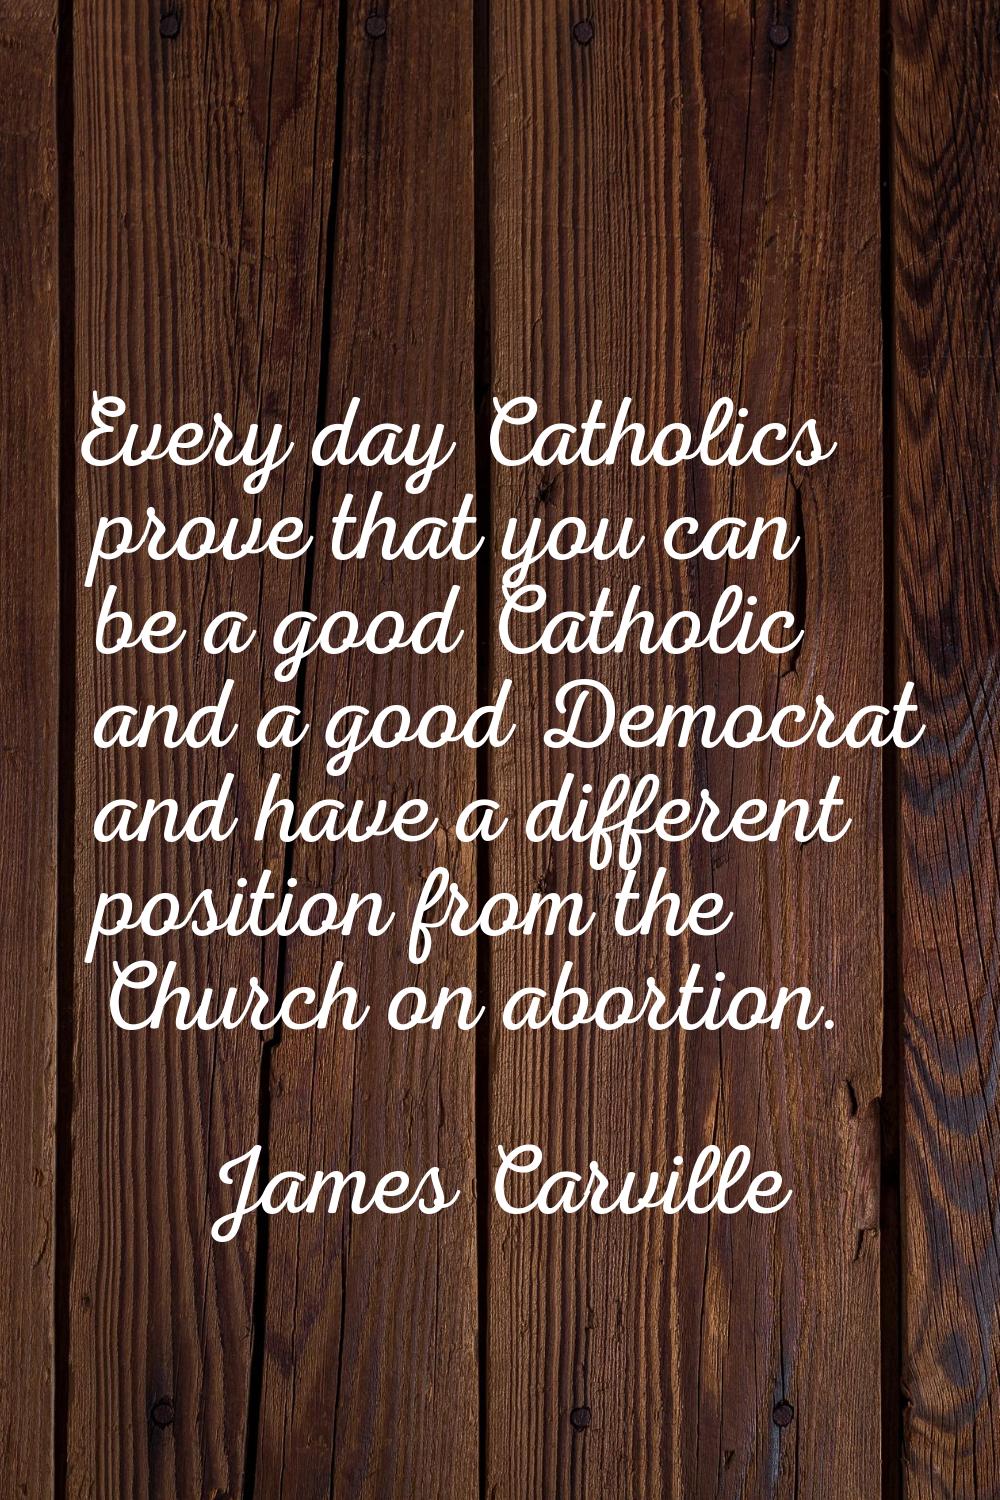 Every day Catholics prove that you can be a good Catholic and a good Democrat and have a different 